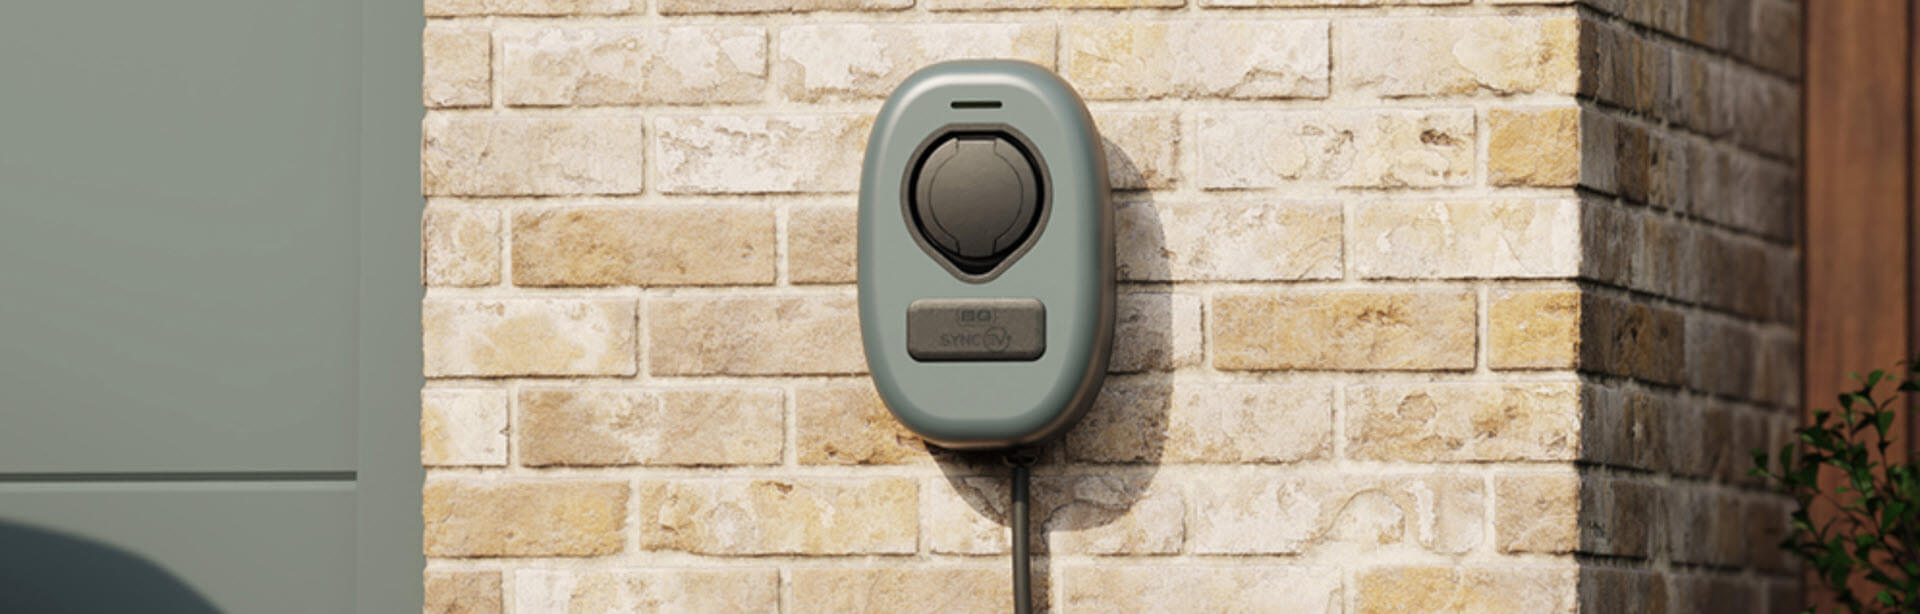 BG Sync EV charger installed on the exterior wall next to the garage.